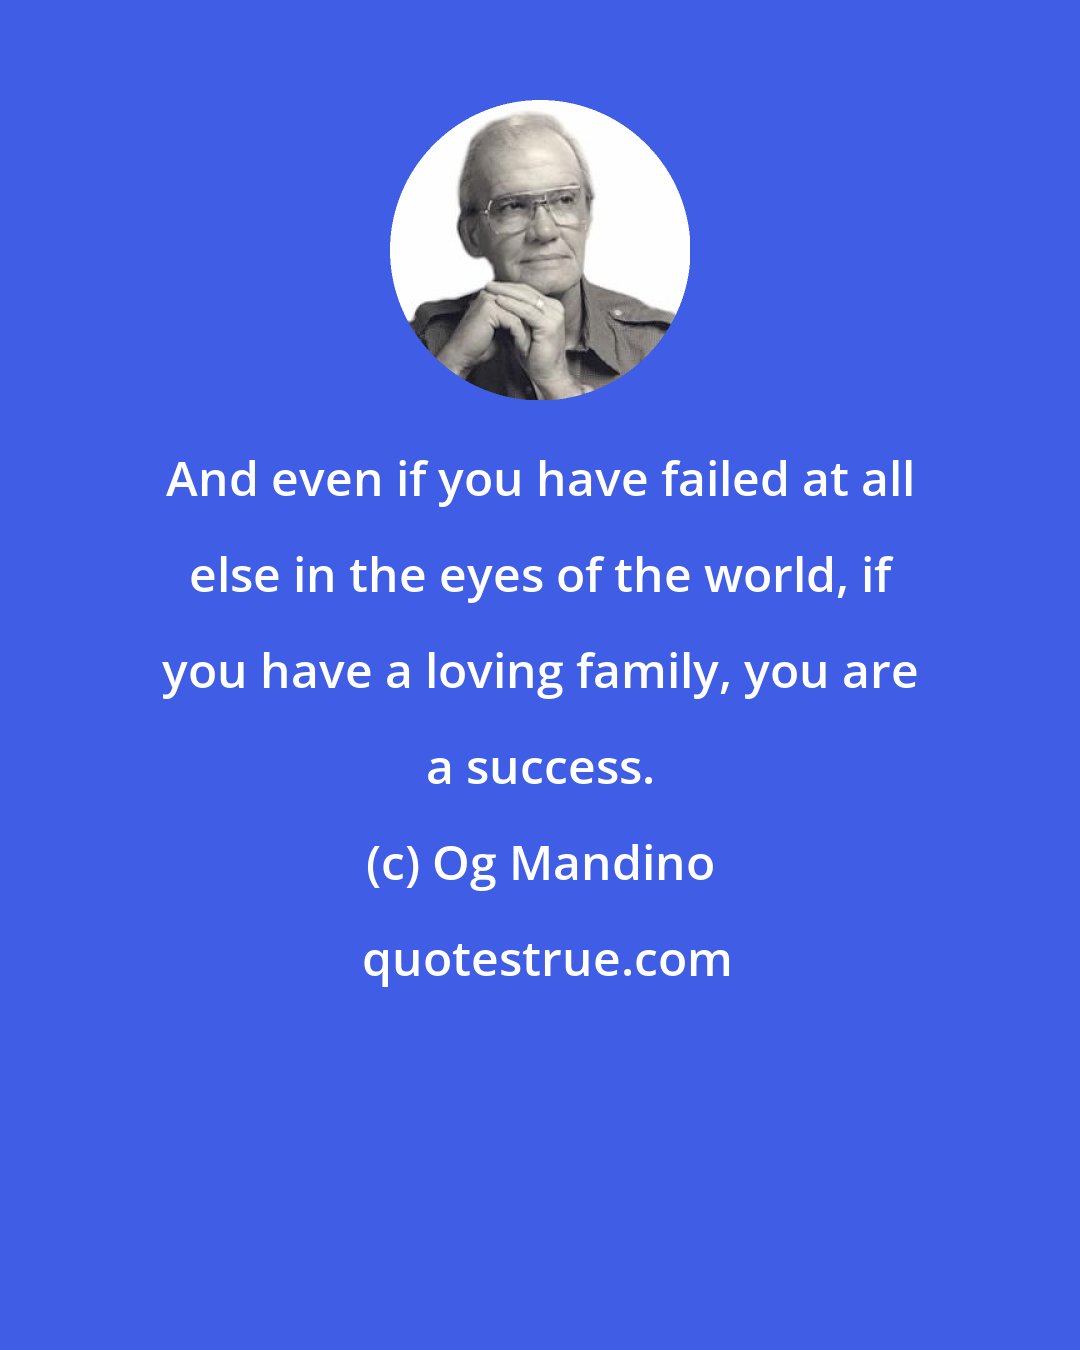 Og Mandino: And even if you have failed at all else in the eyes of the world, if you have a loving family, you are a success.